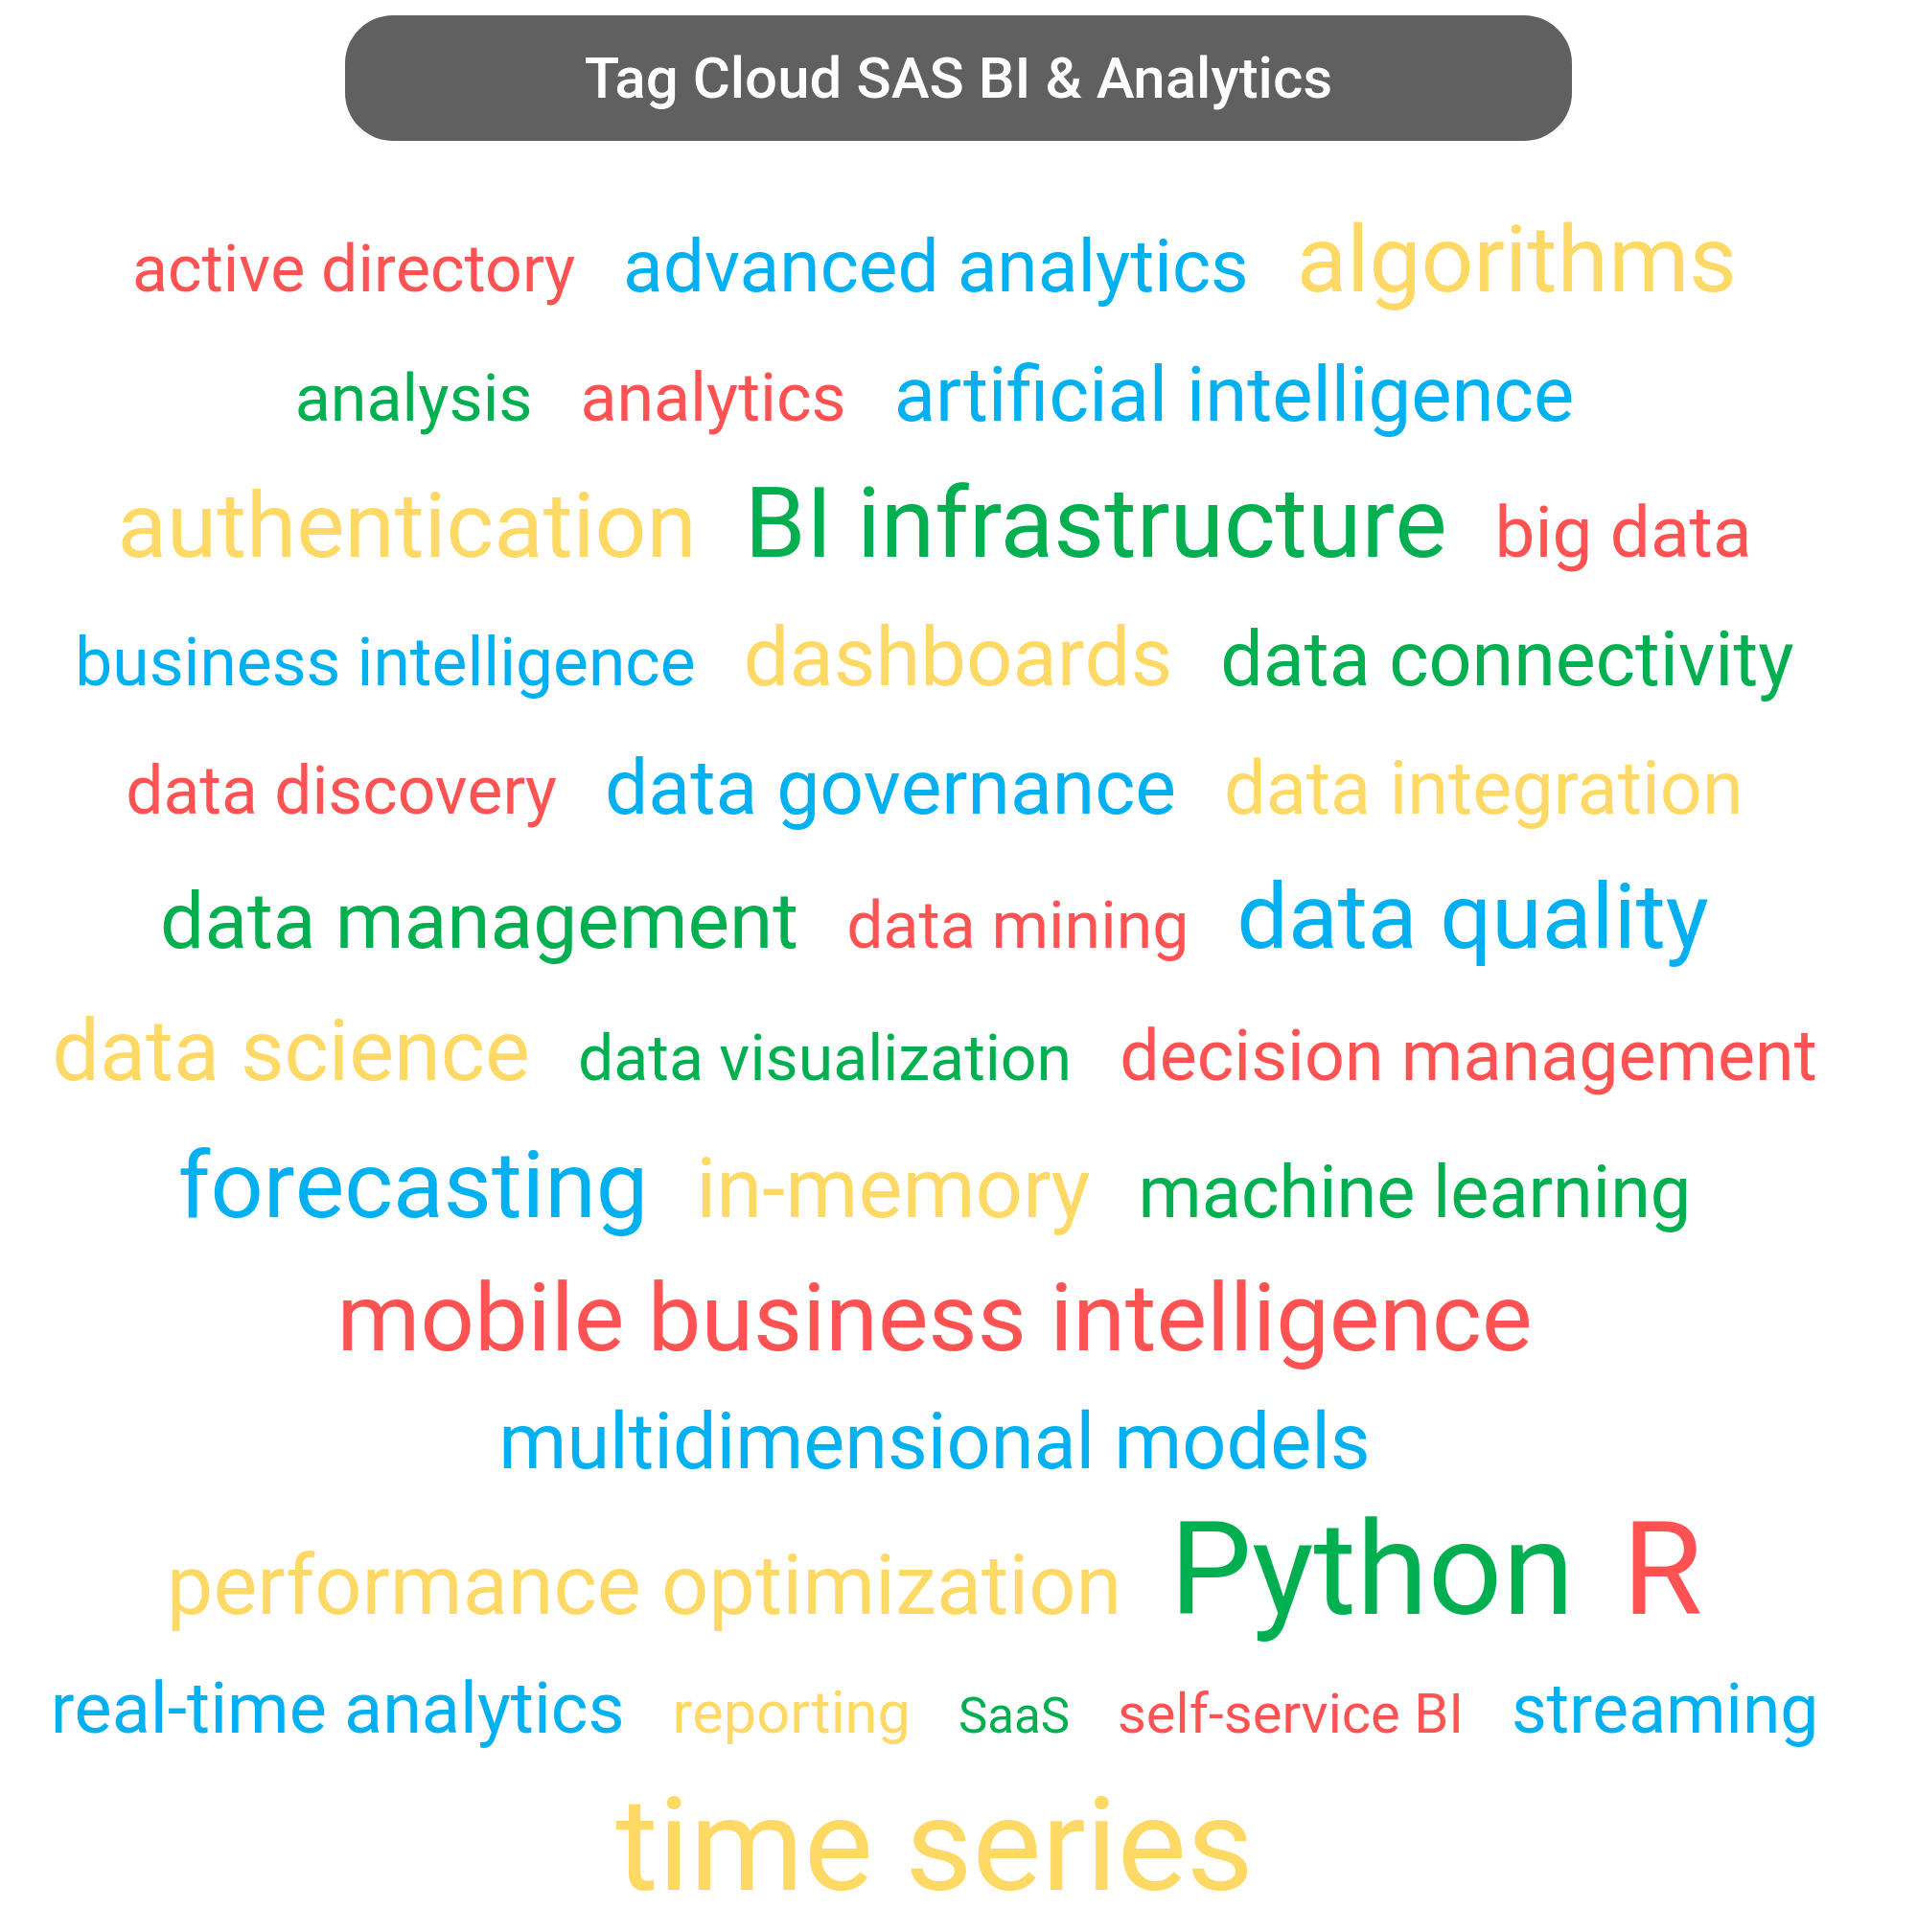 Tag cloud of the SAS Business Analytics tools.